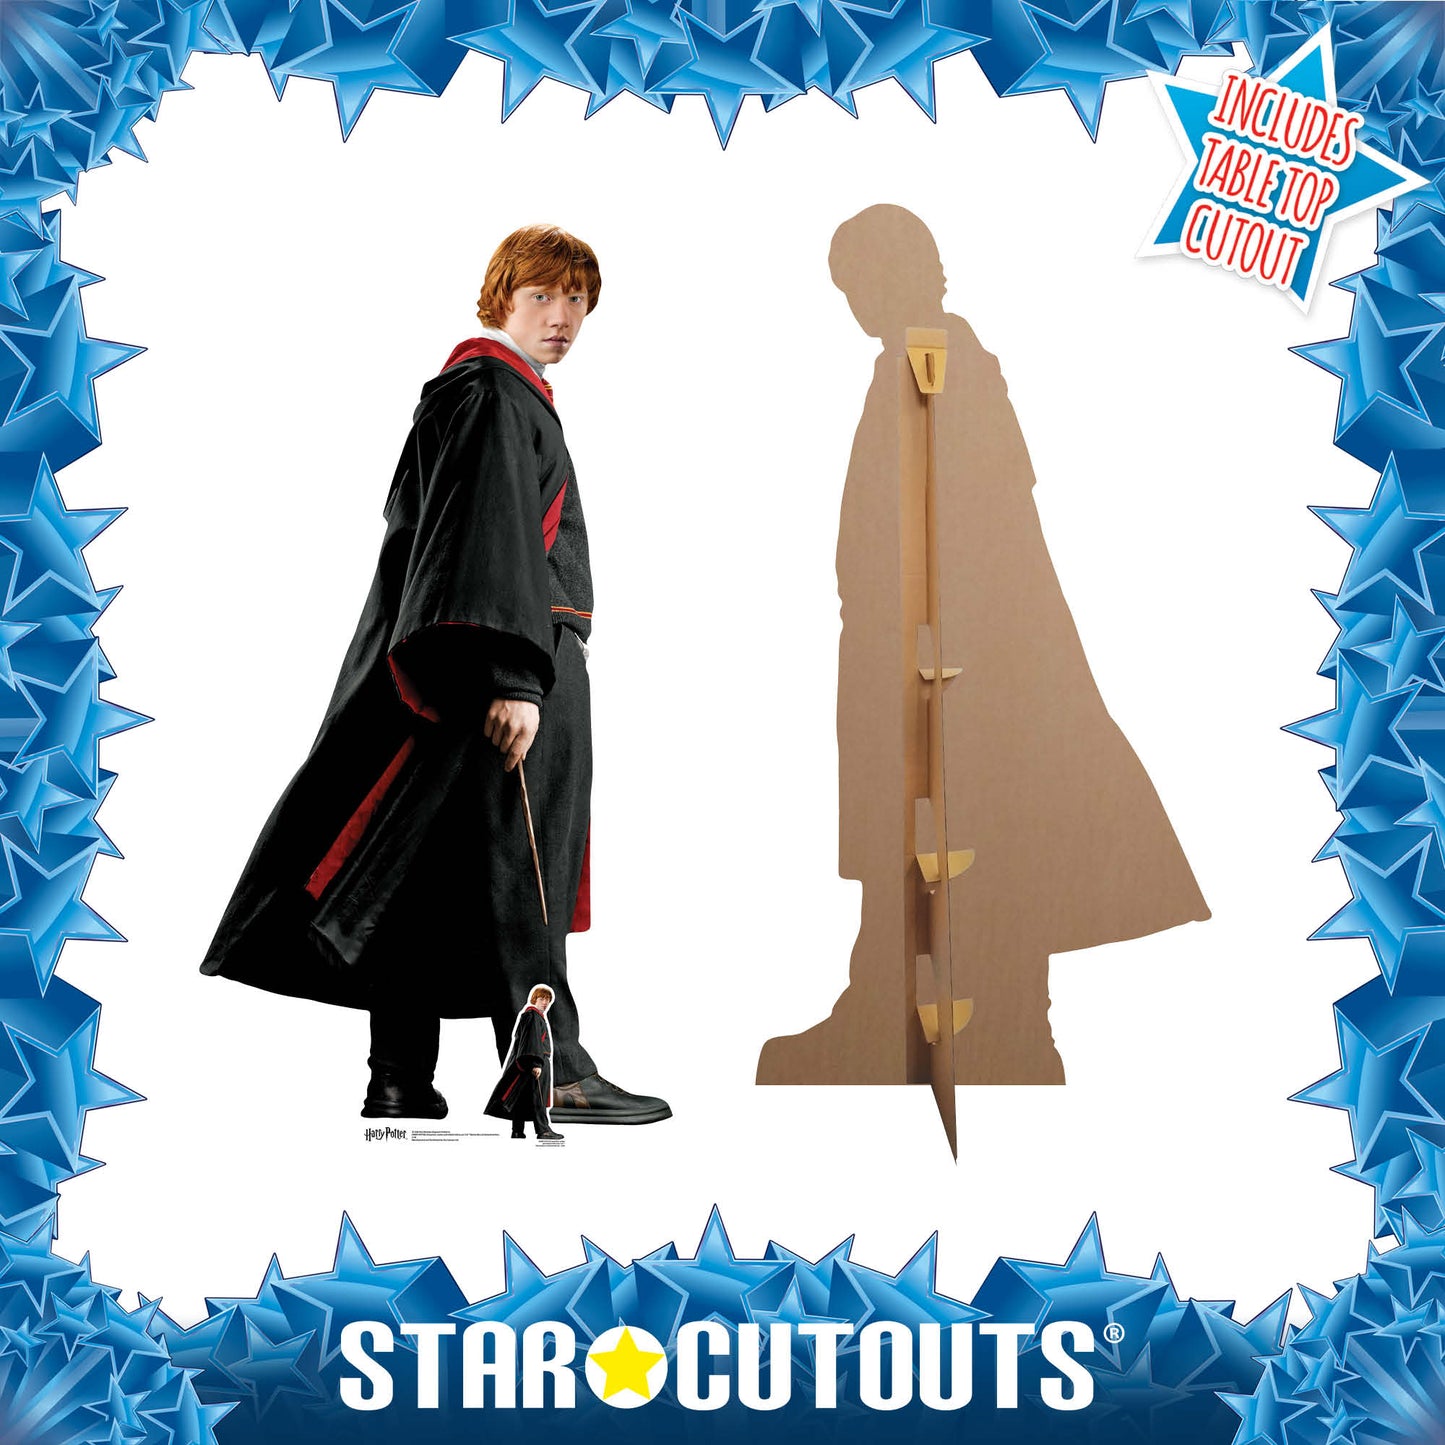 SC1086 Ron Weasley Hogwarts School of Witchcraft and Wizardry Uniform Cardboard Cut Out Height 176cm